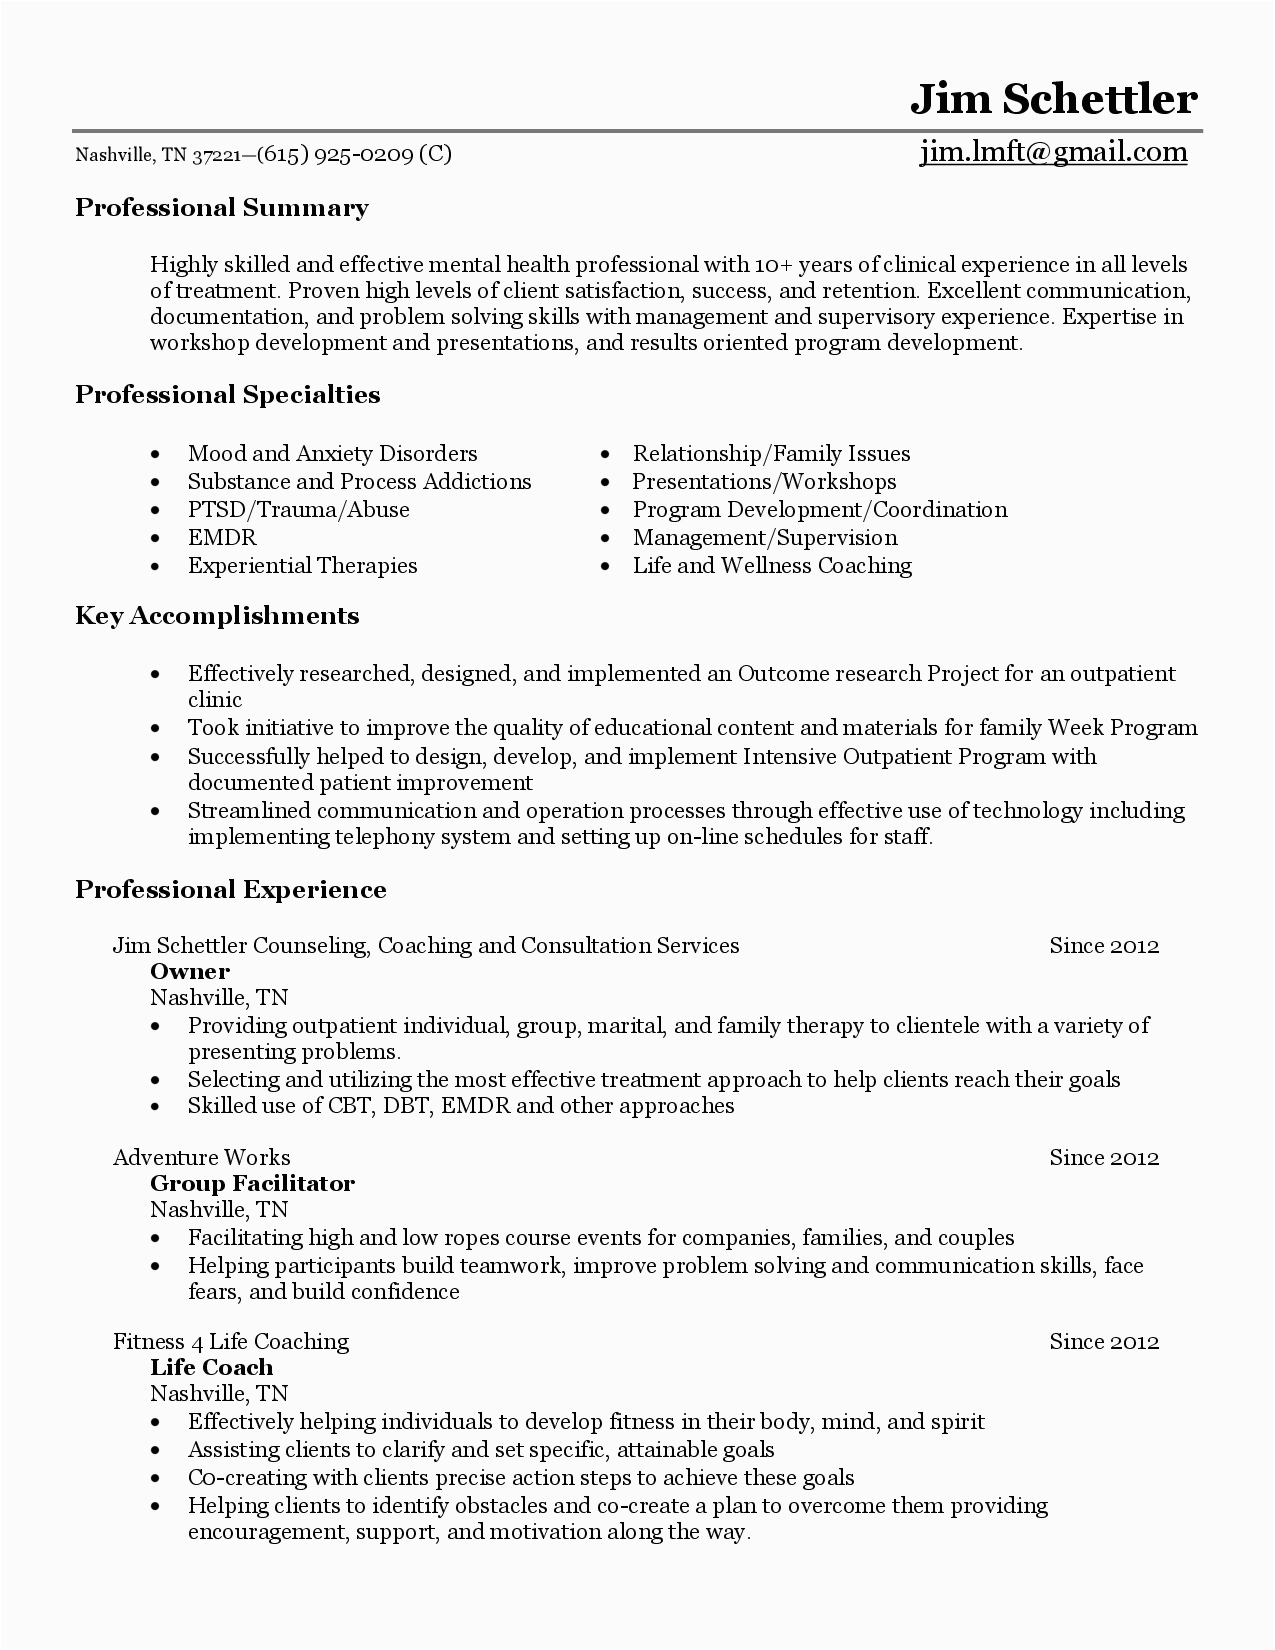 Sample Resume for Guidance Counselor Position Counselor Resume Sample – Salescvfo